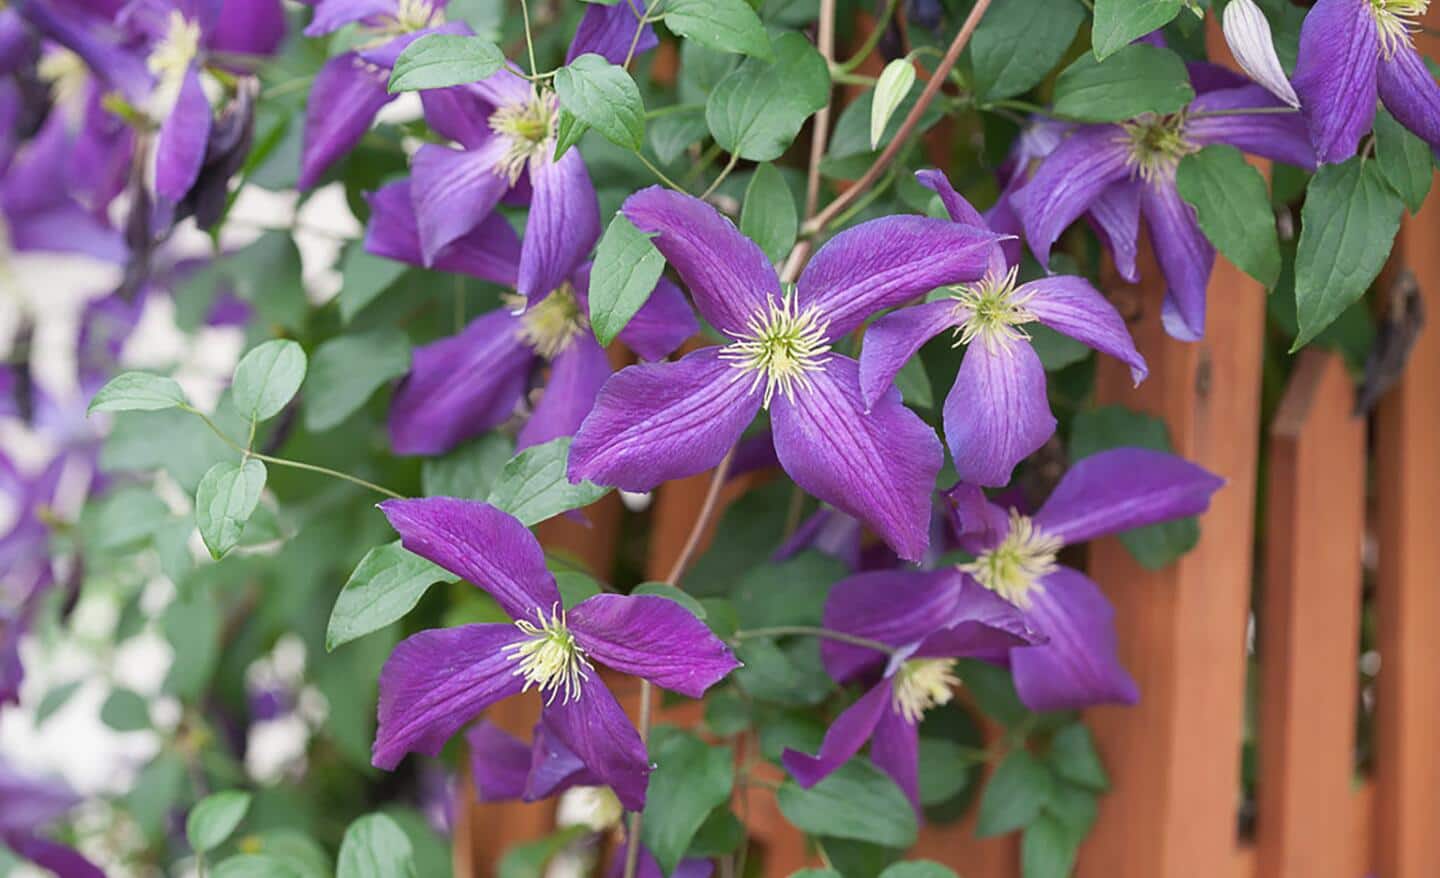 Purple clematis vine growing on a fence